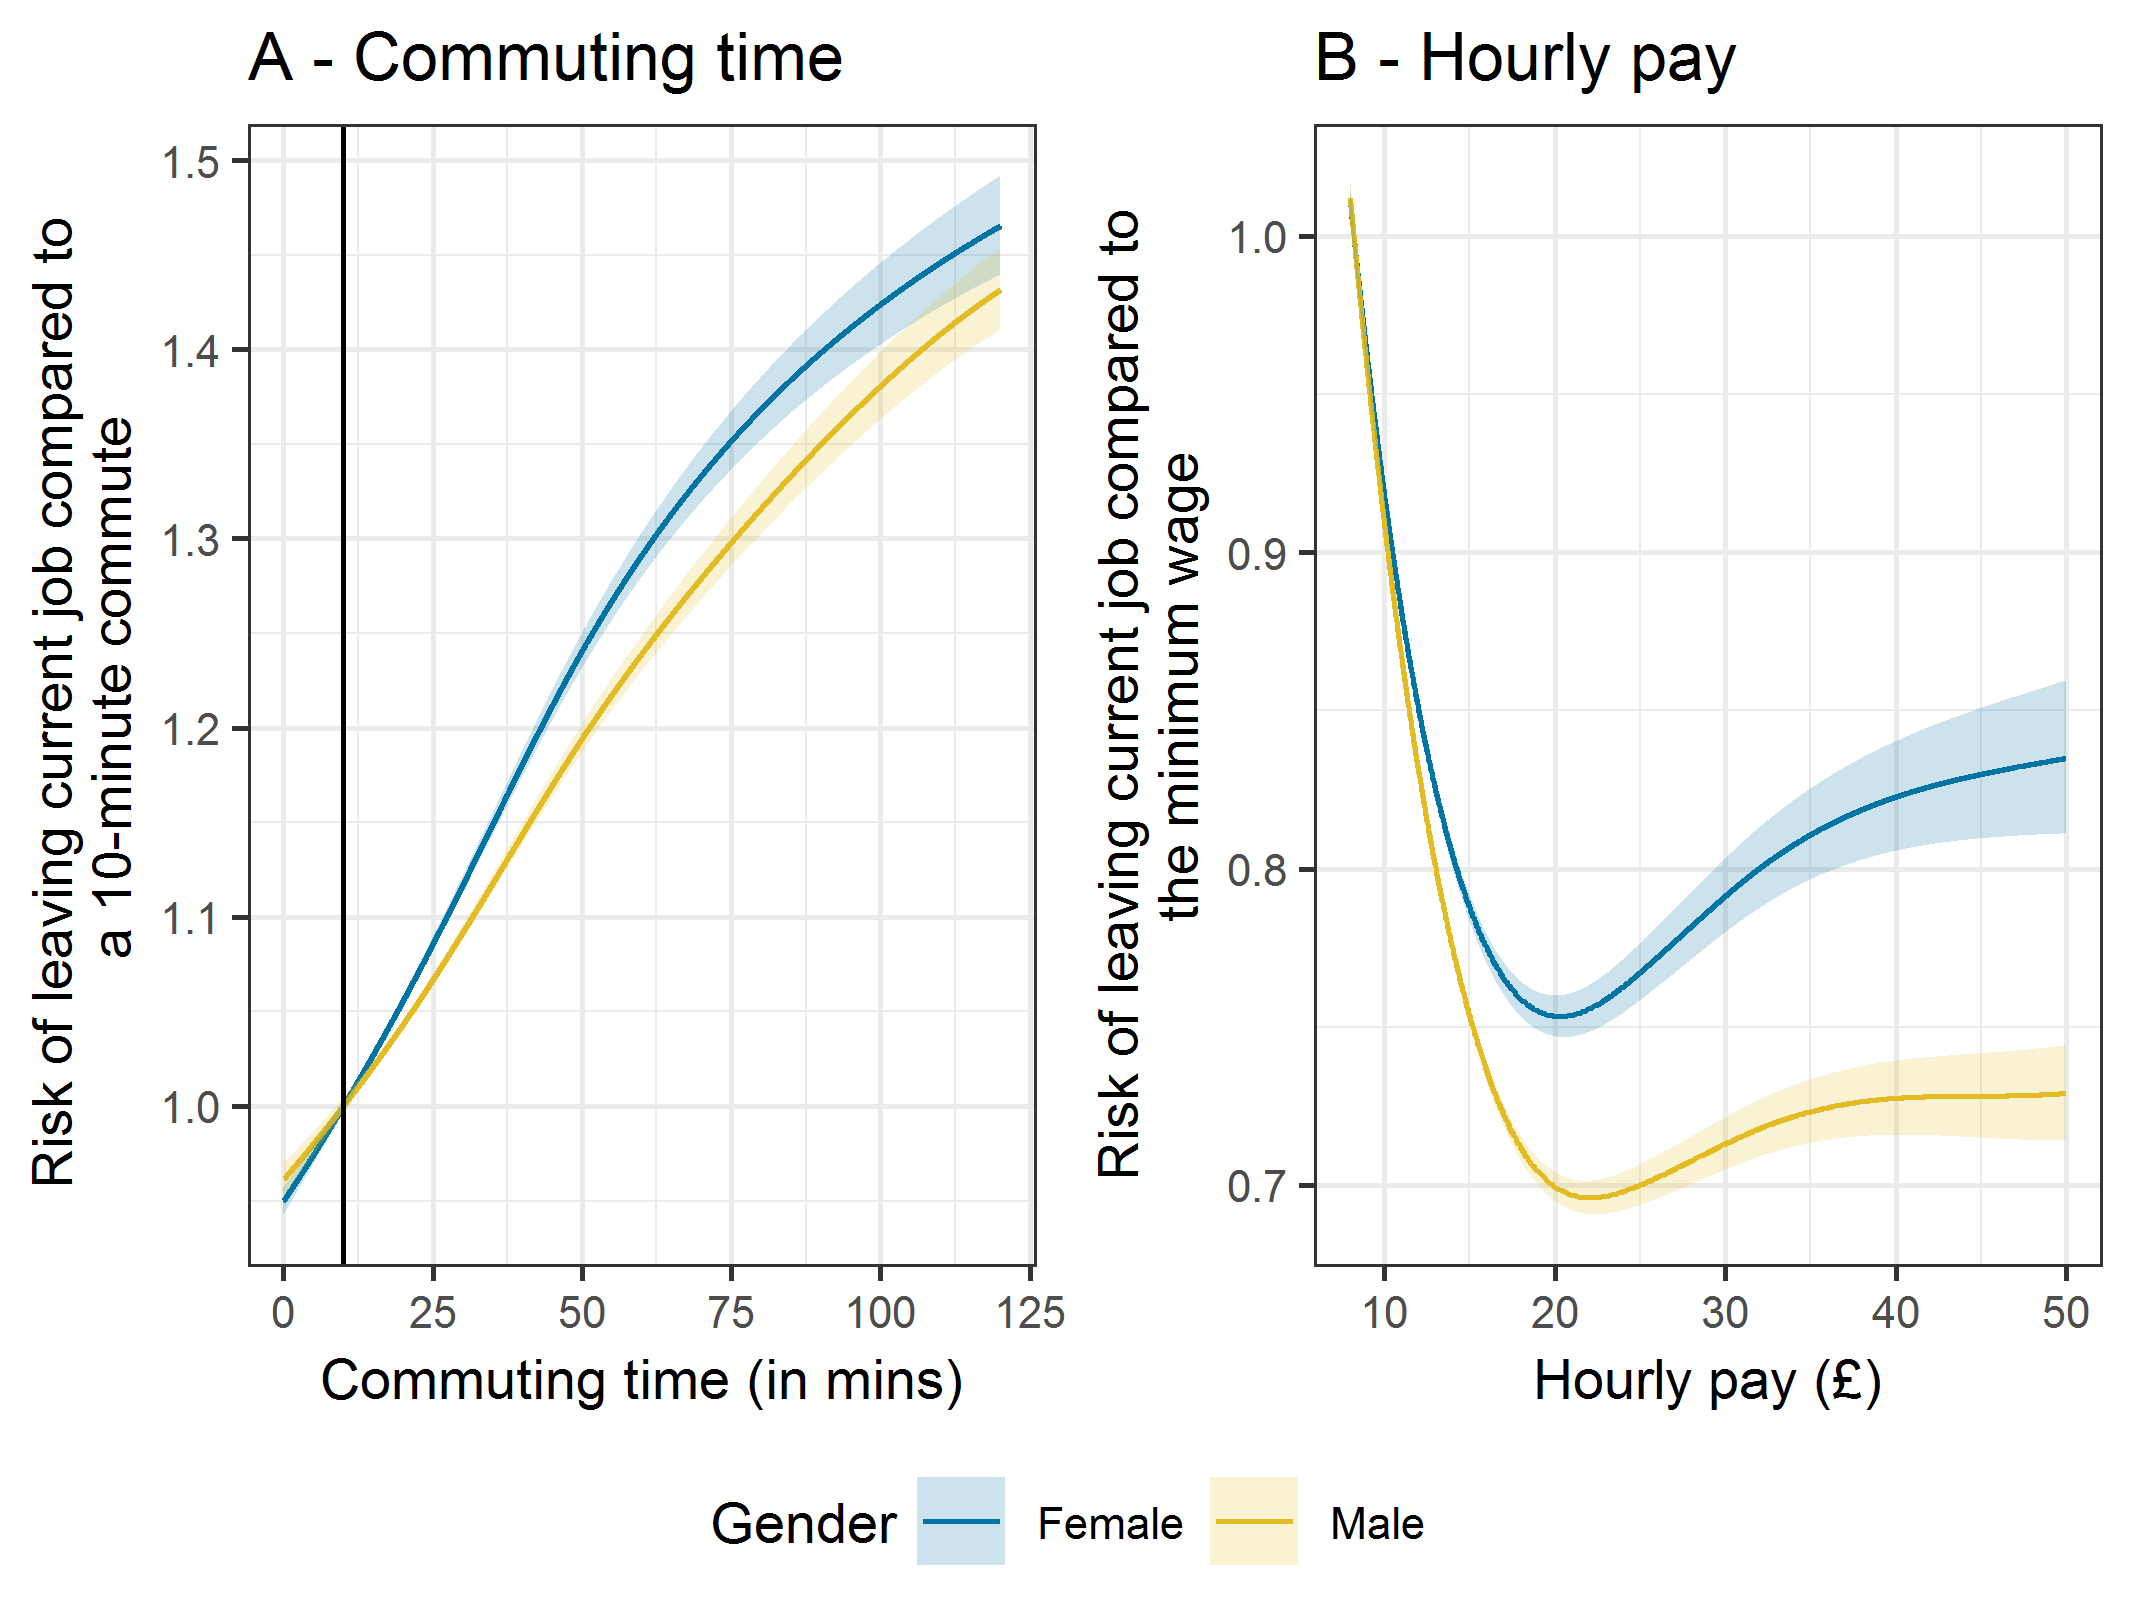 Effect of commuting time and hourly pay on annual job separation rate - full results.